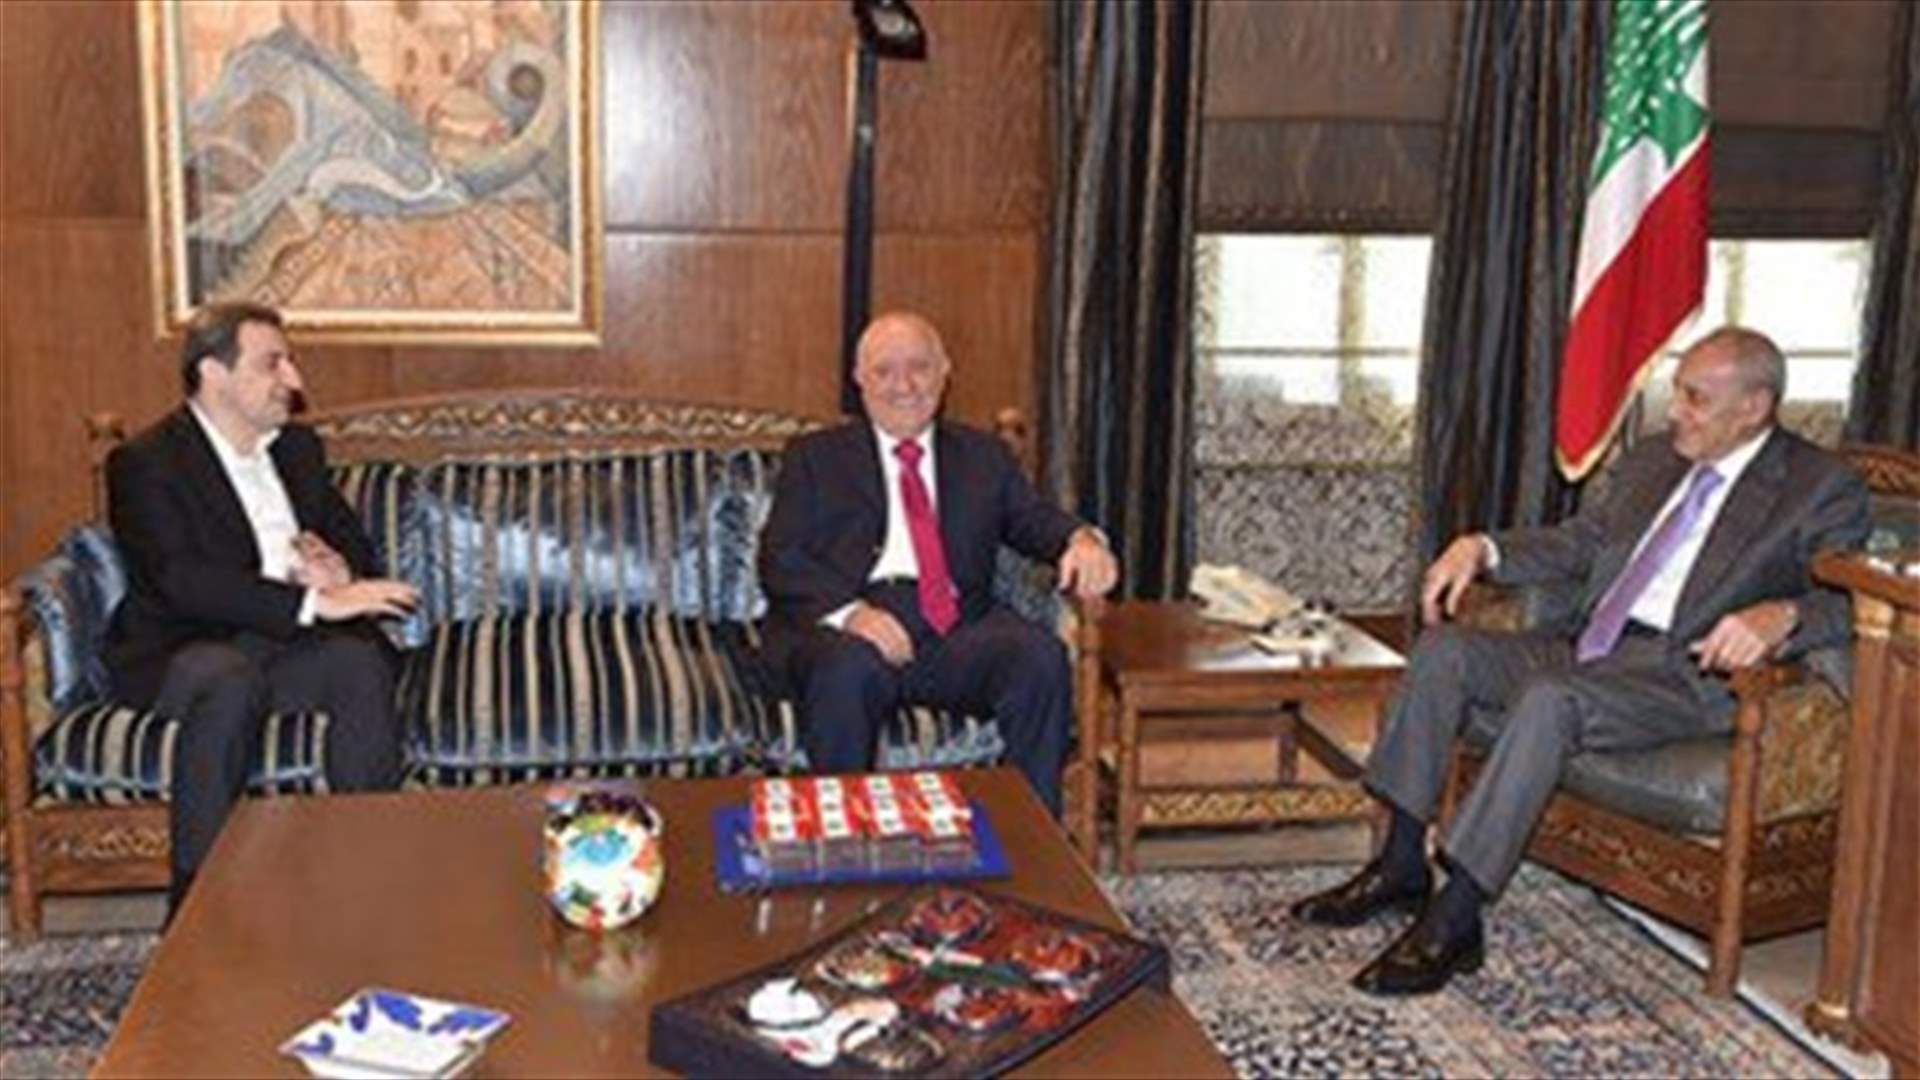 Cabinet formation focus of Berri meeting with Abou Faour, Al-Aridi